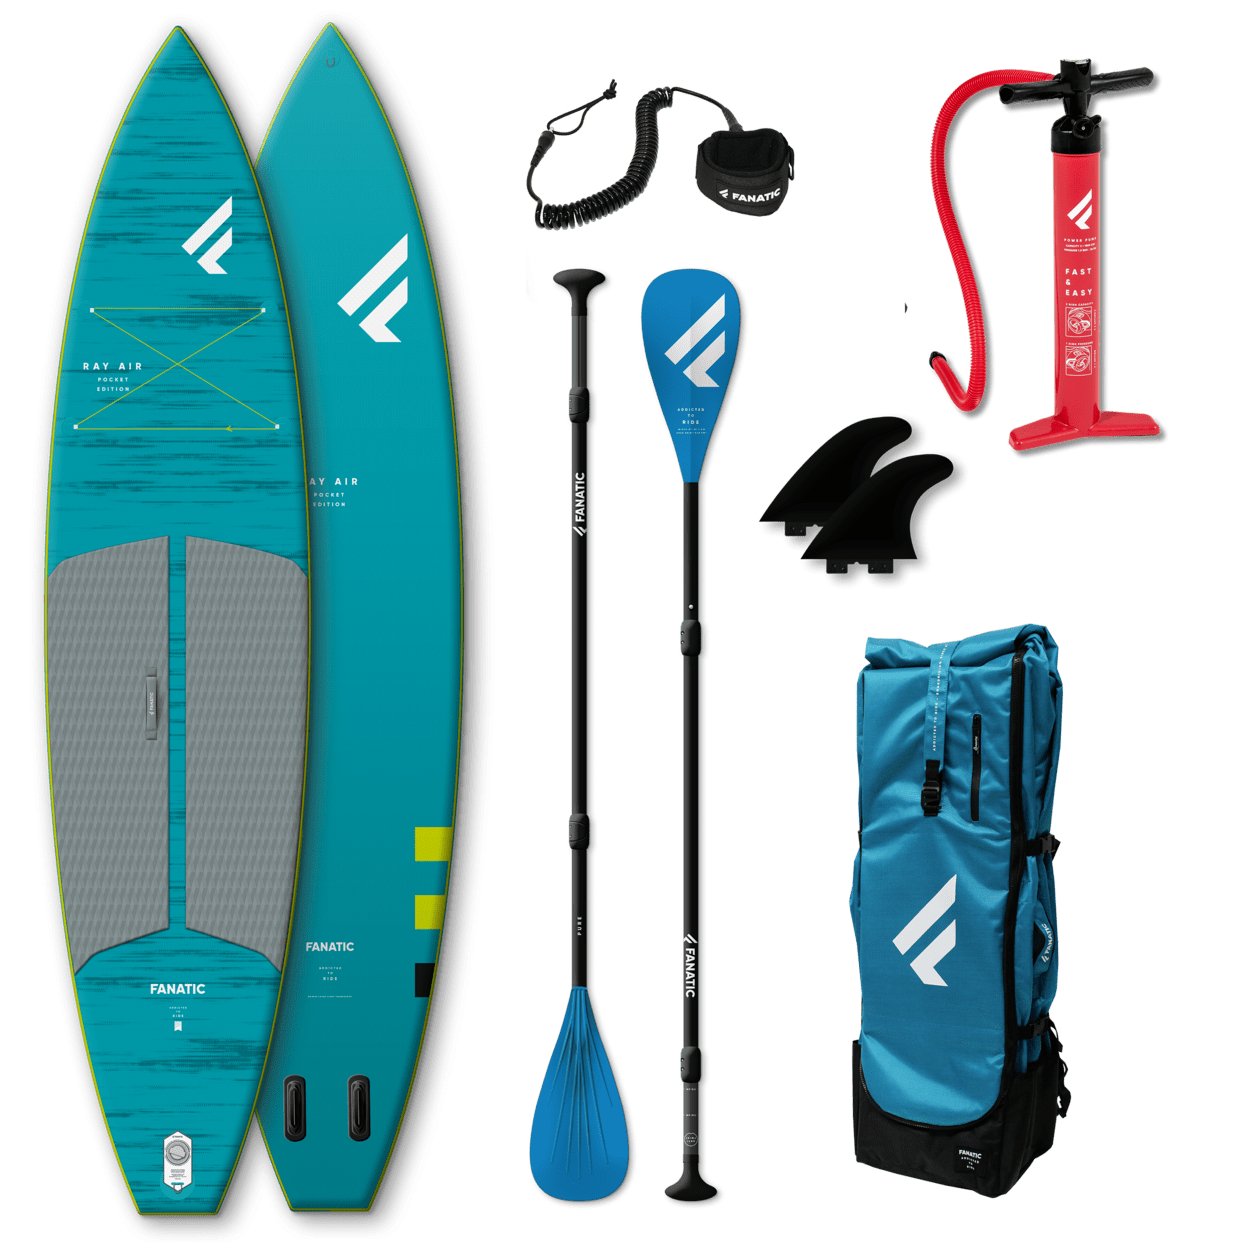 Fanatic Package Ray Air Pocket/Pure 2022 iSUP Paddleboard - Worthing Watersports - 9010583014678 - iSUP Packages - Fanatic SUP